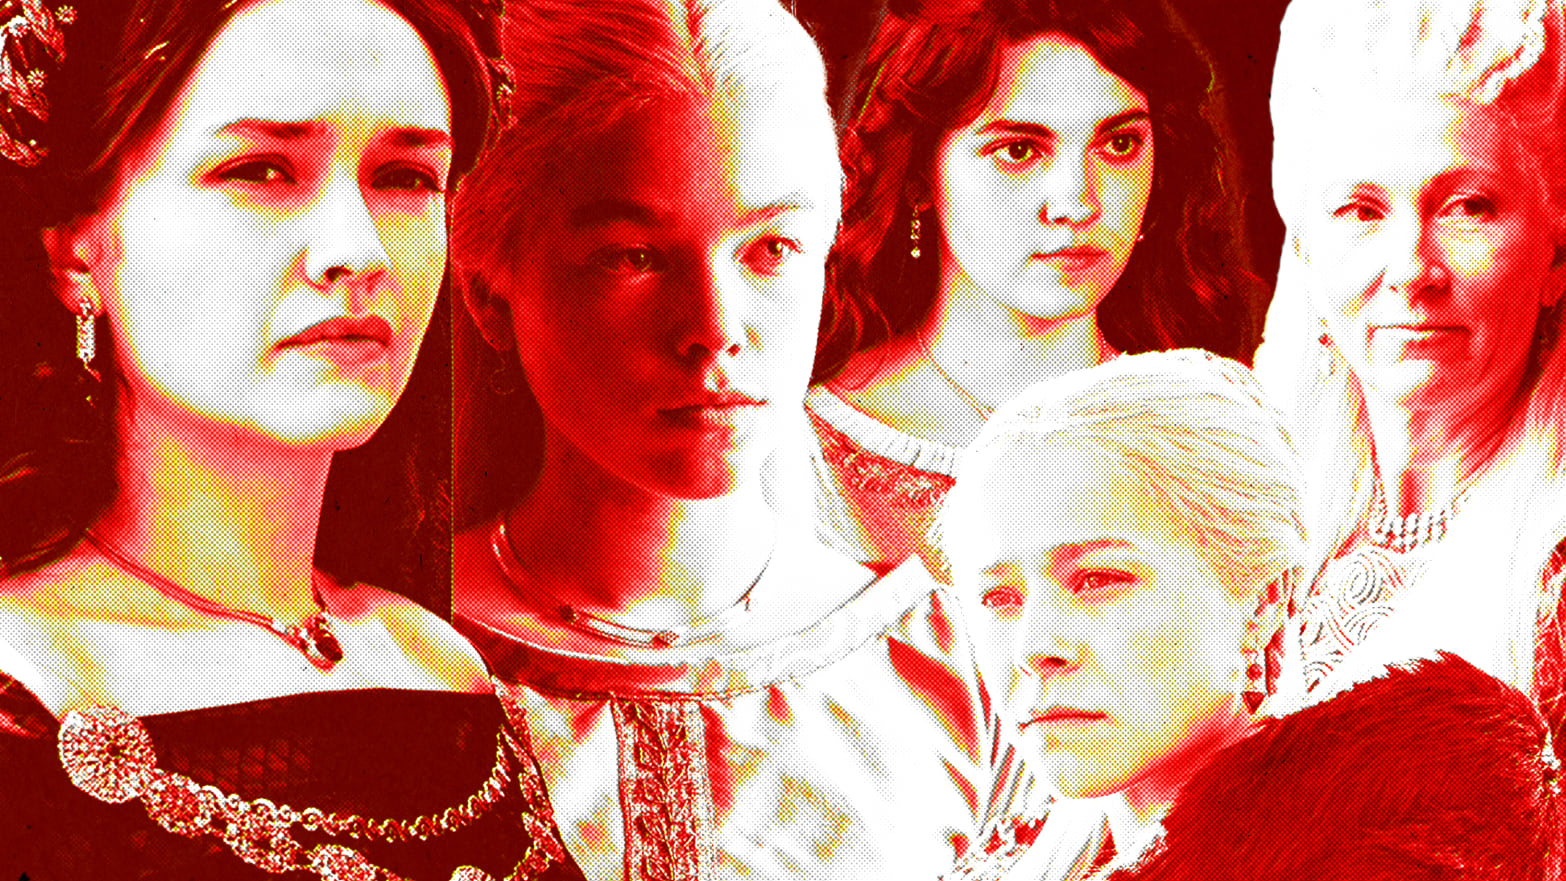 Game of Thrones prequel House of the Dragon confirms there will be no  sexual violence on screen. Here's why that's important